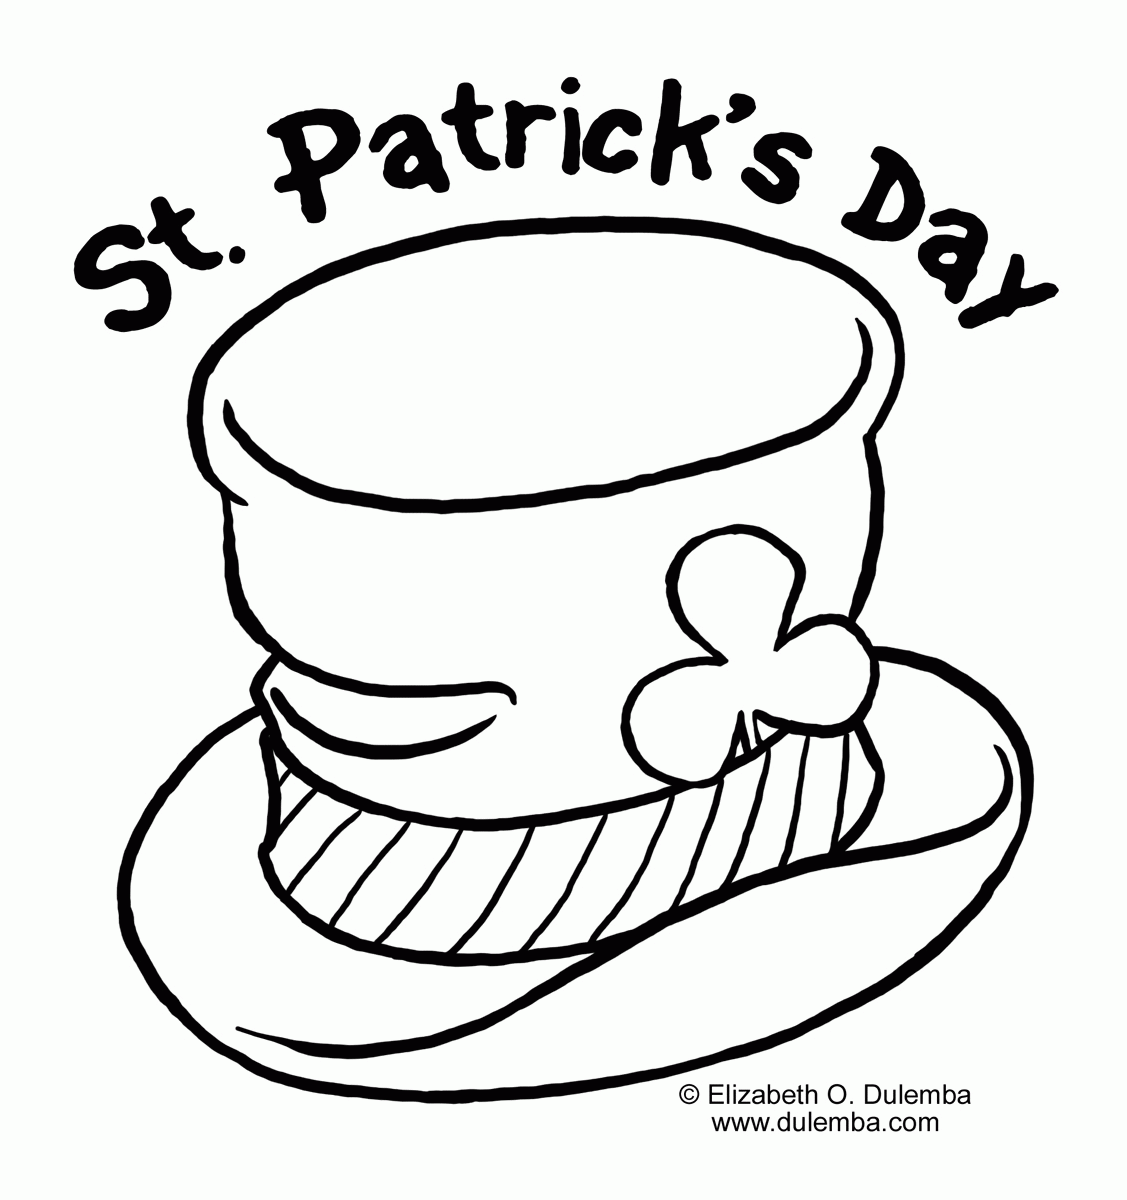 leprechaun coloring | Only Coloring Pages